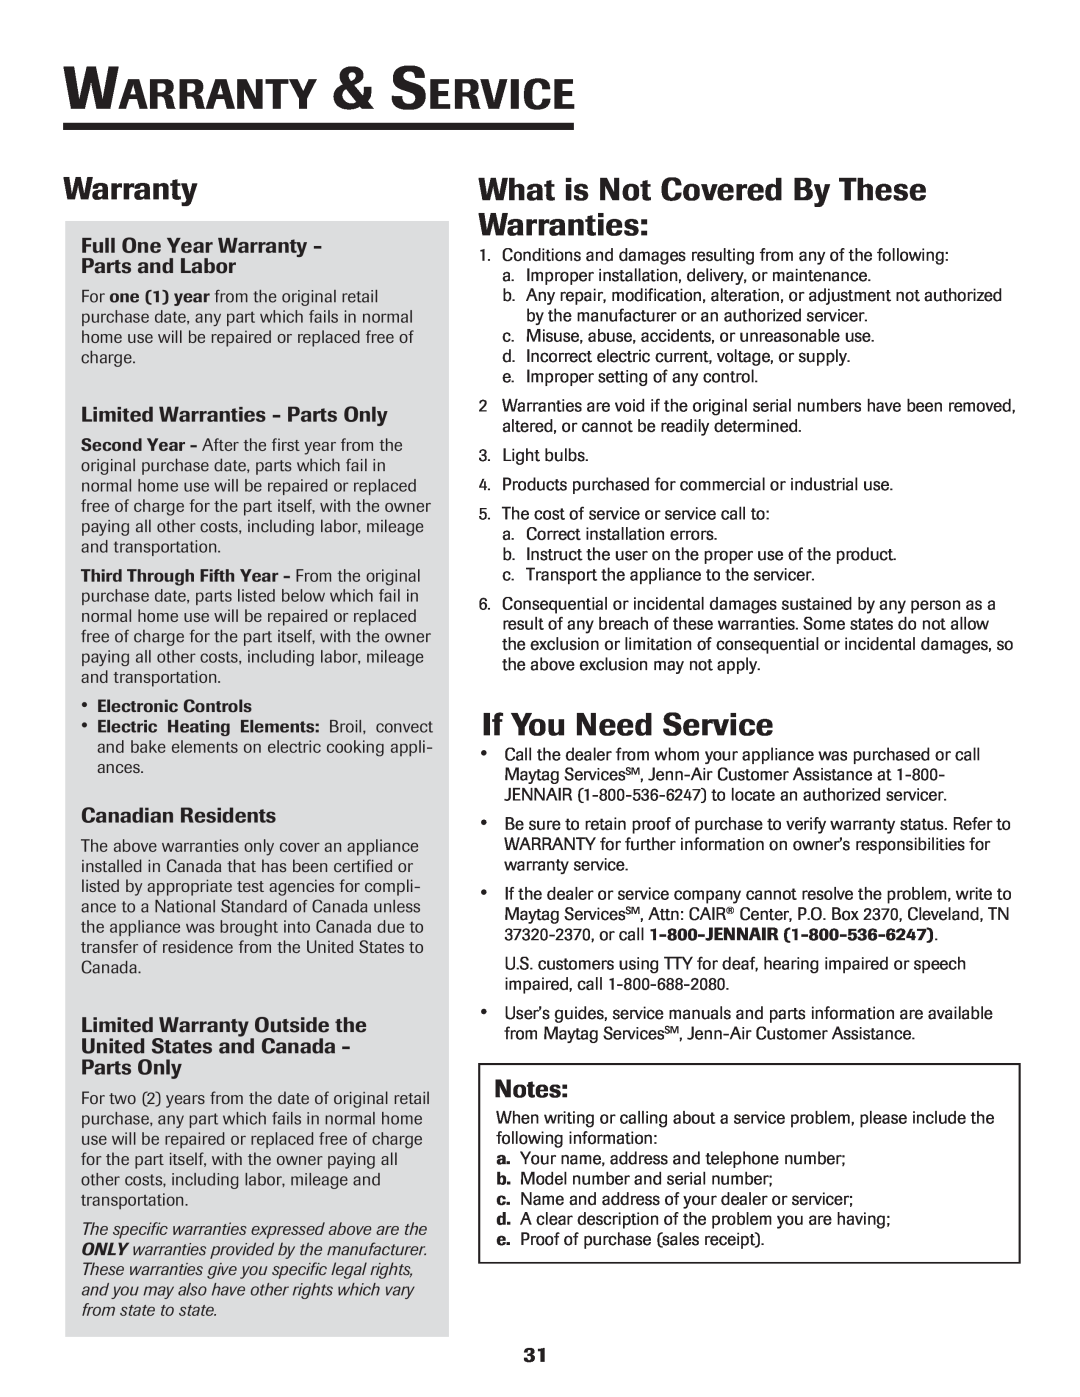 Jenn-Air 8112P212-60 Warranty & Service, What is Not Covered By These Warranties, If You Need Service, Canadian Residents 